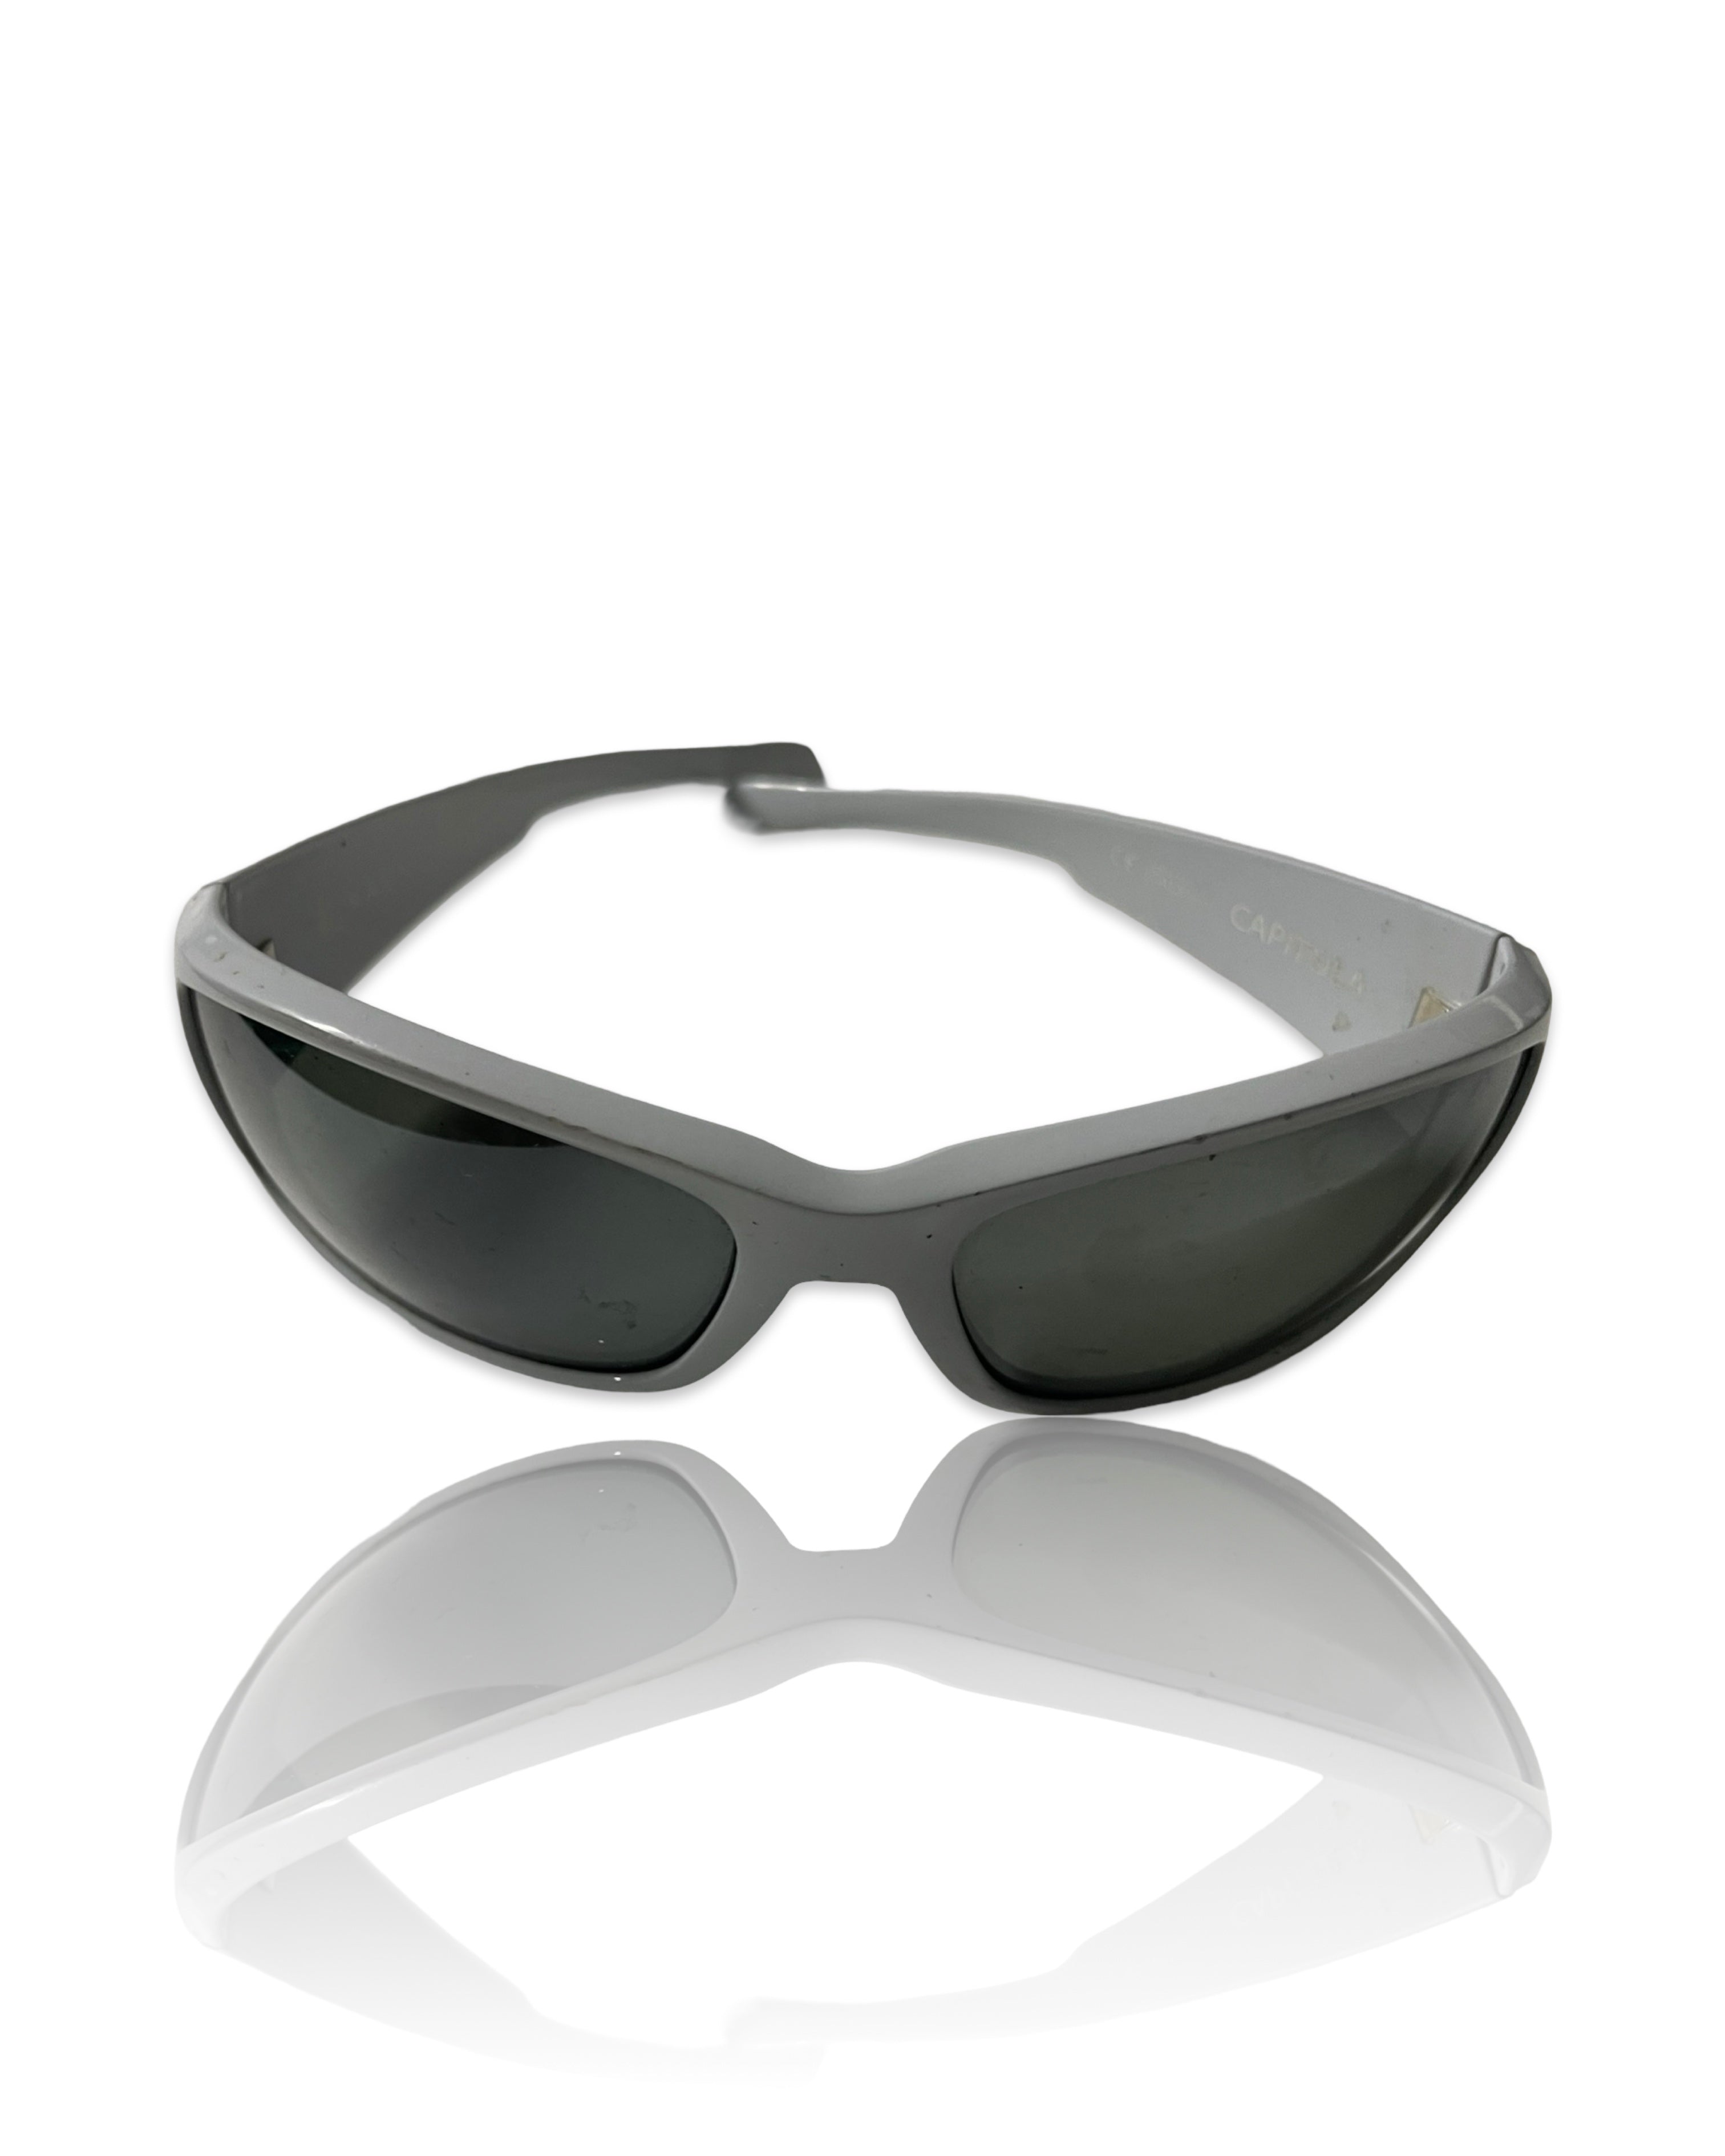 Unisex grey mens and women's Made in Italy Capitoli sunglasses |SKU 4219